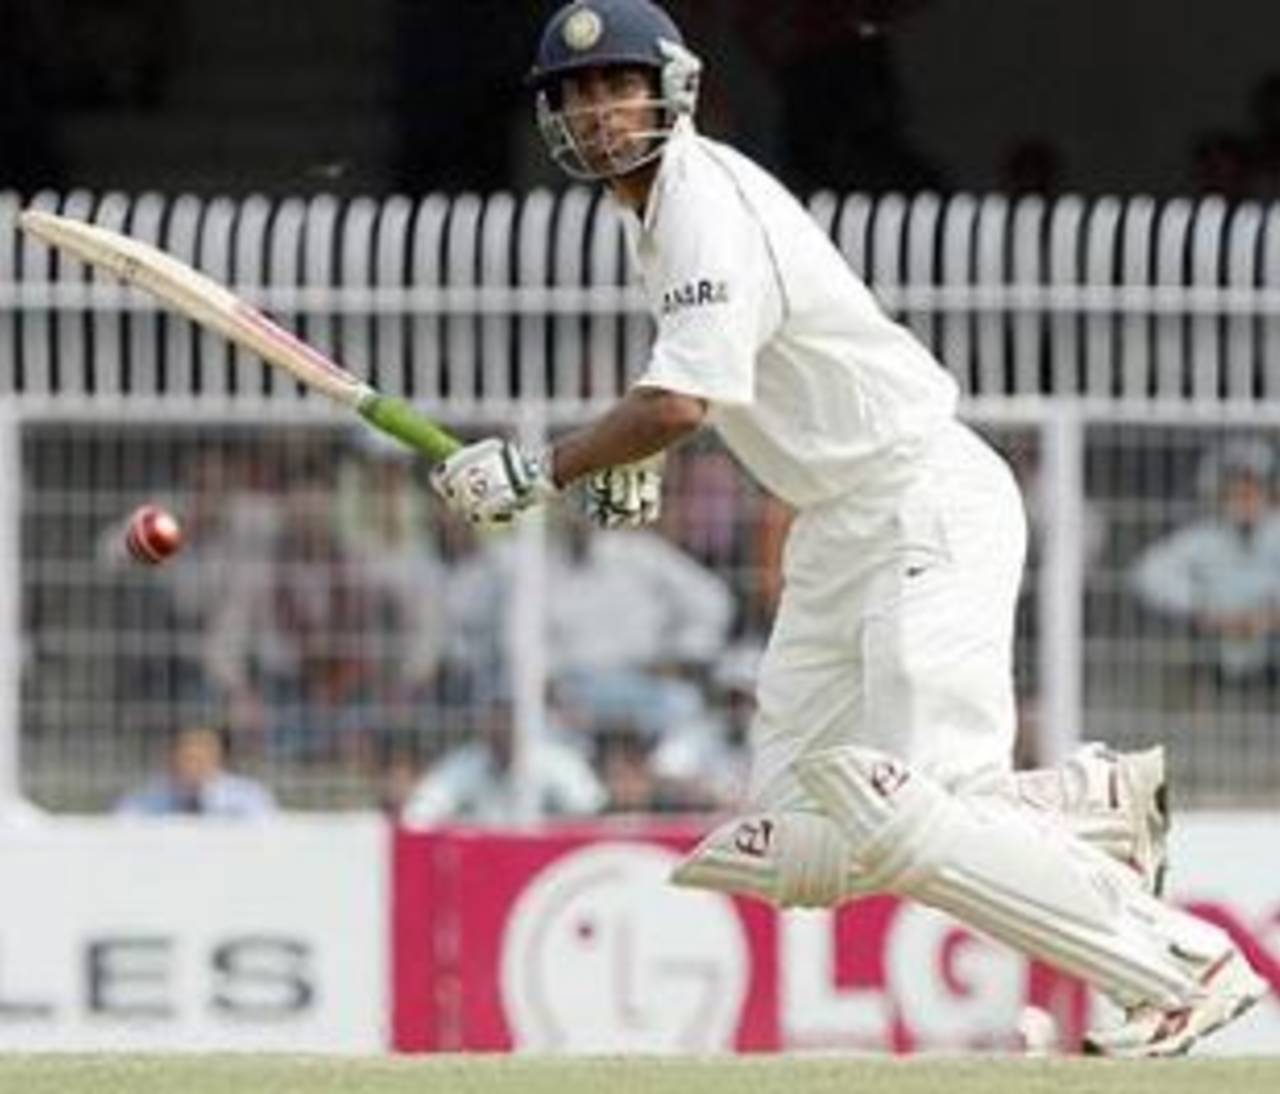 Mohammad Kaif turns one to leg, India v England, 1st Test, Nagpur, 3rd day, March 3 2006